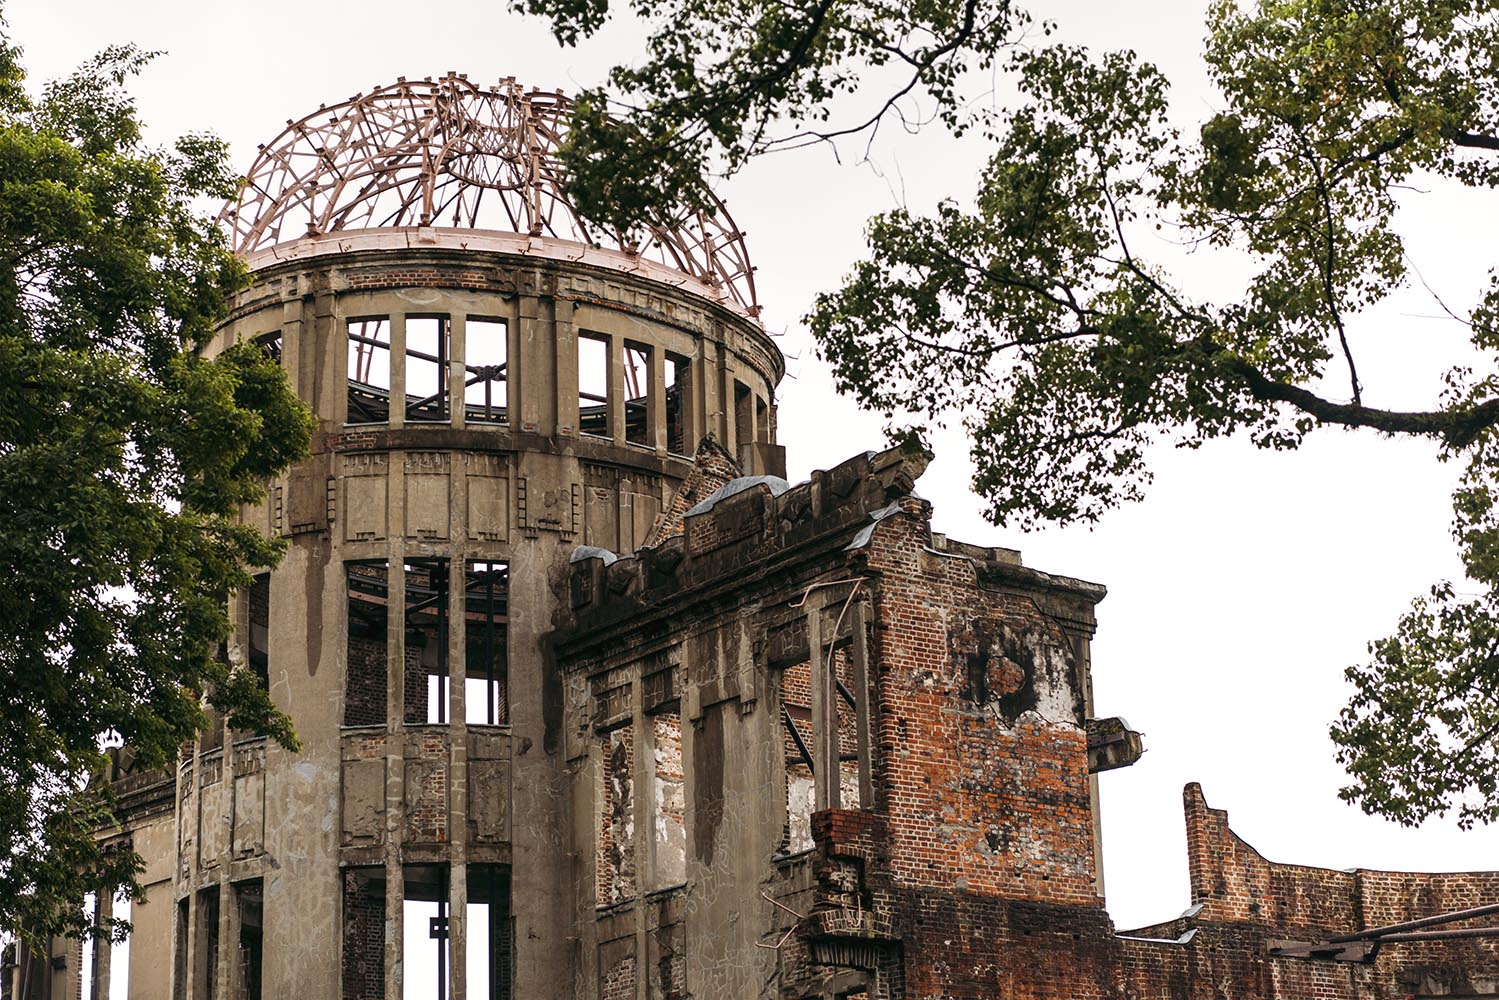 The Atomic Bomb dome, one of the few buildings left standing aft